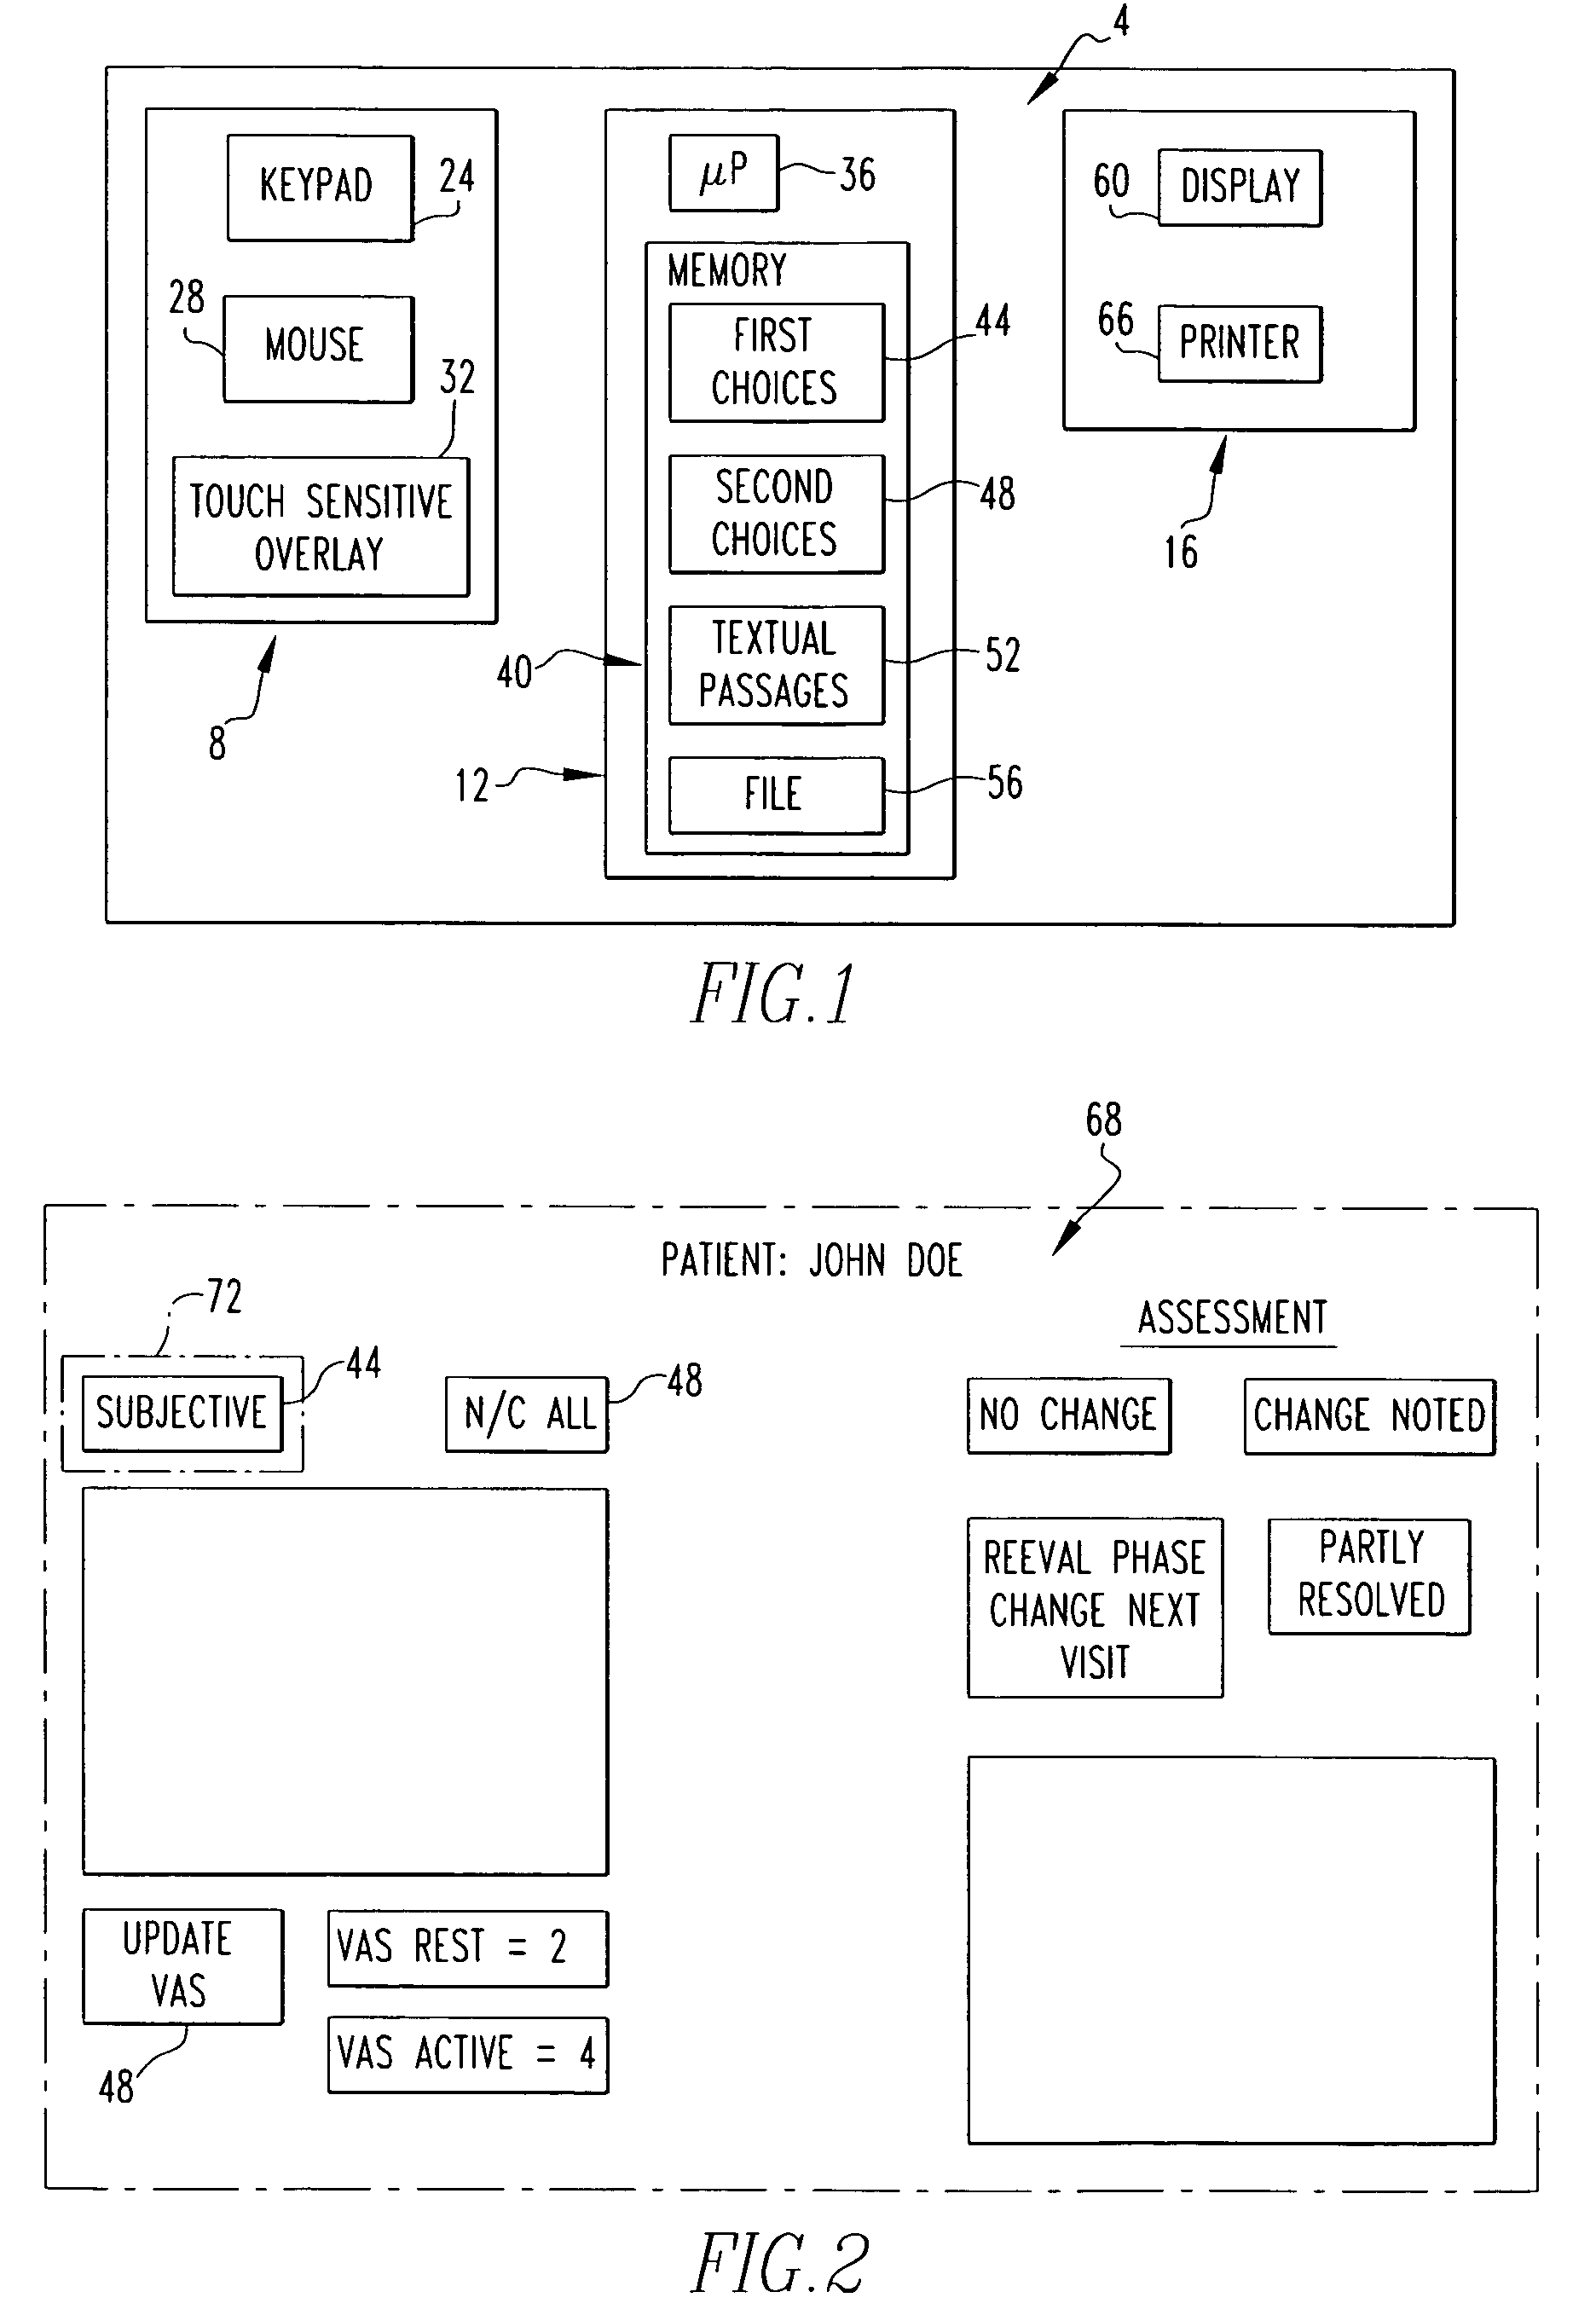 Method and apparatus for generating and storing data and for generating a narrative report